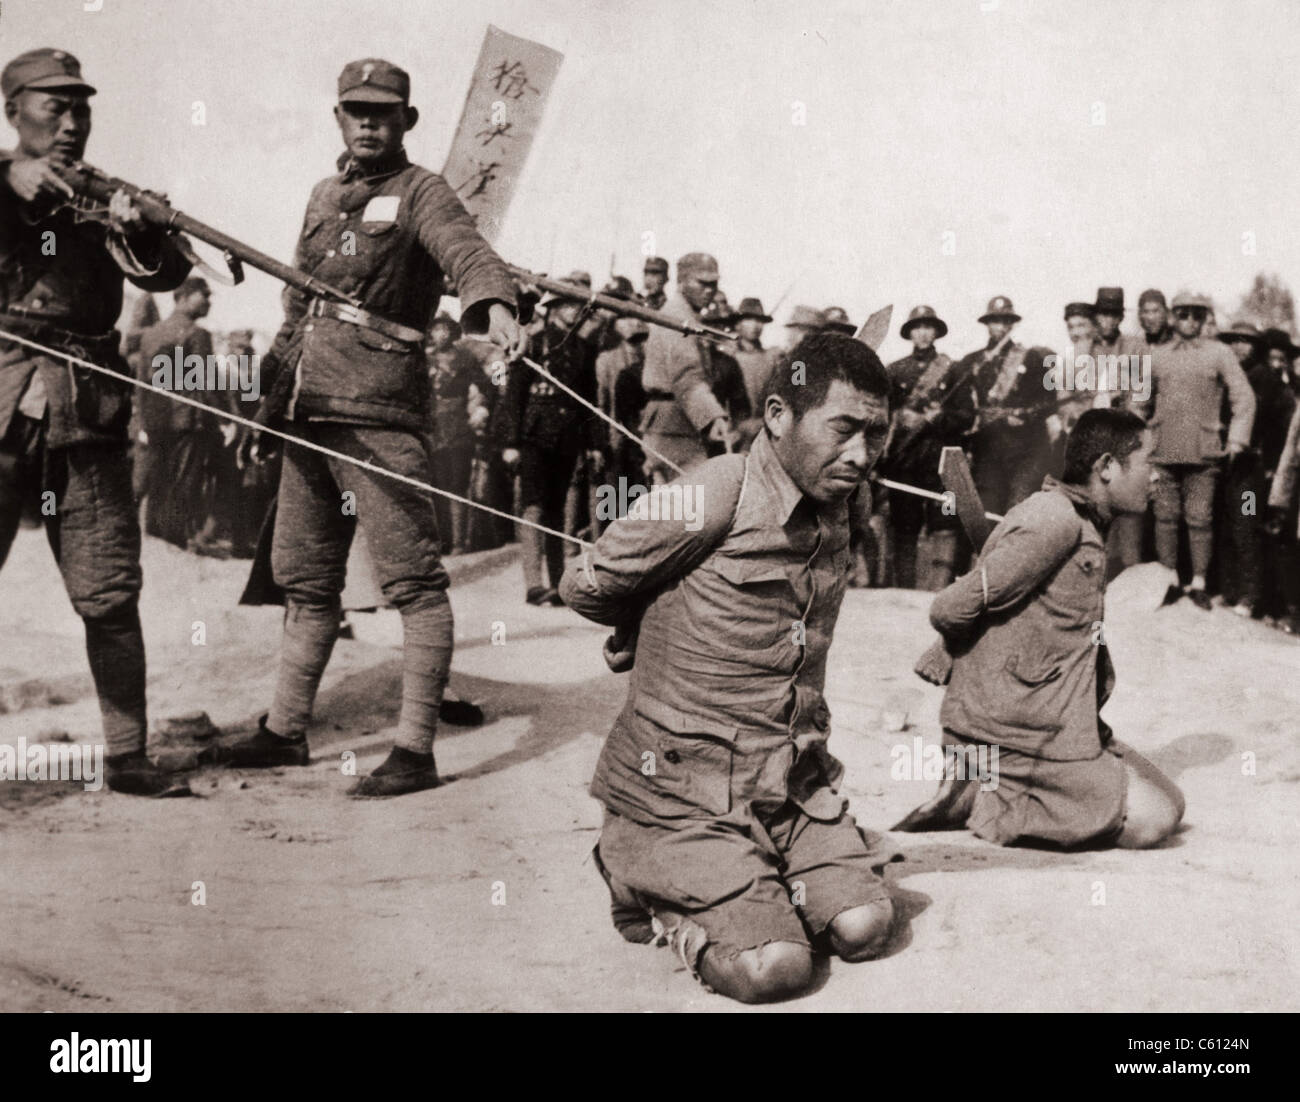 Two Chinese men kneeling prior to execution by Chinese soldiers. The Sino-Japanese war (1937-1945) was a fight against the Japanese occupation as well as a civil war between the Nationalists and Communists. Stock Photo